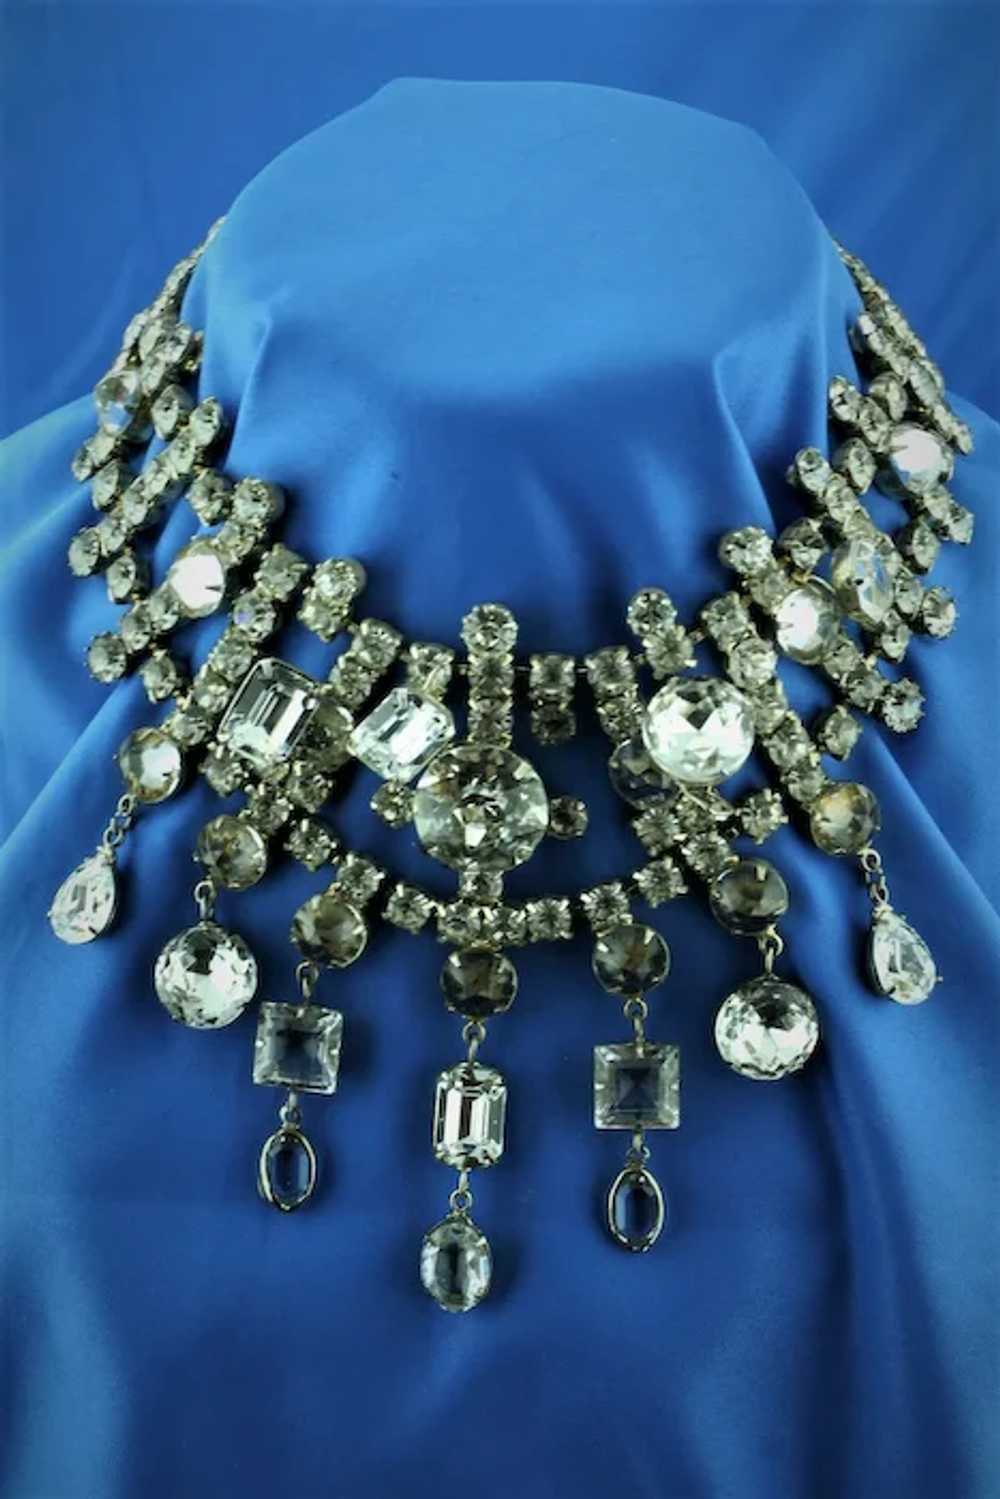 Kenneth Lane for Dynasty Necklace and Earrings - image 7